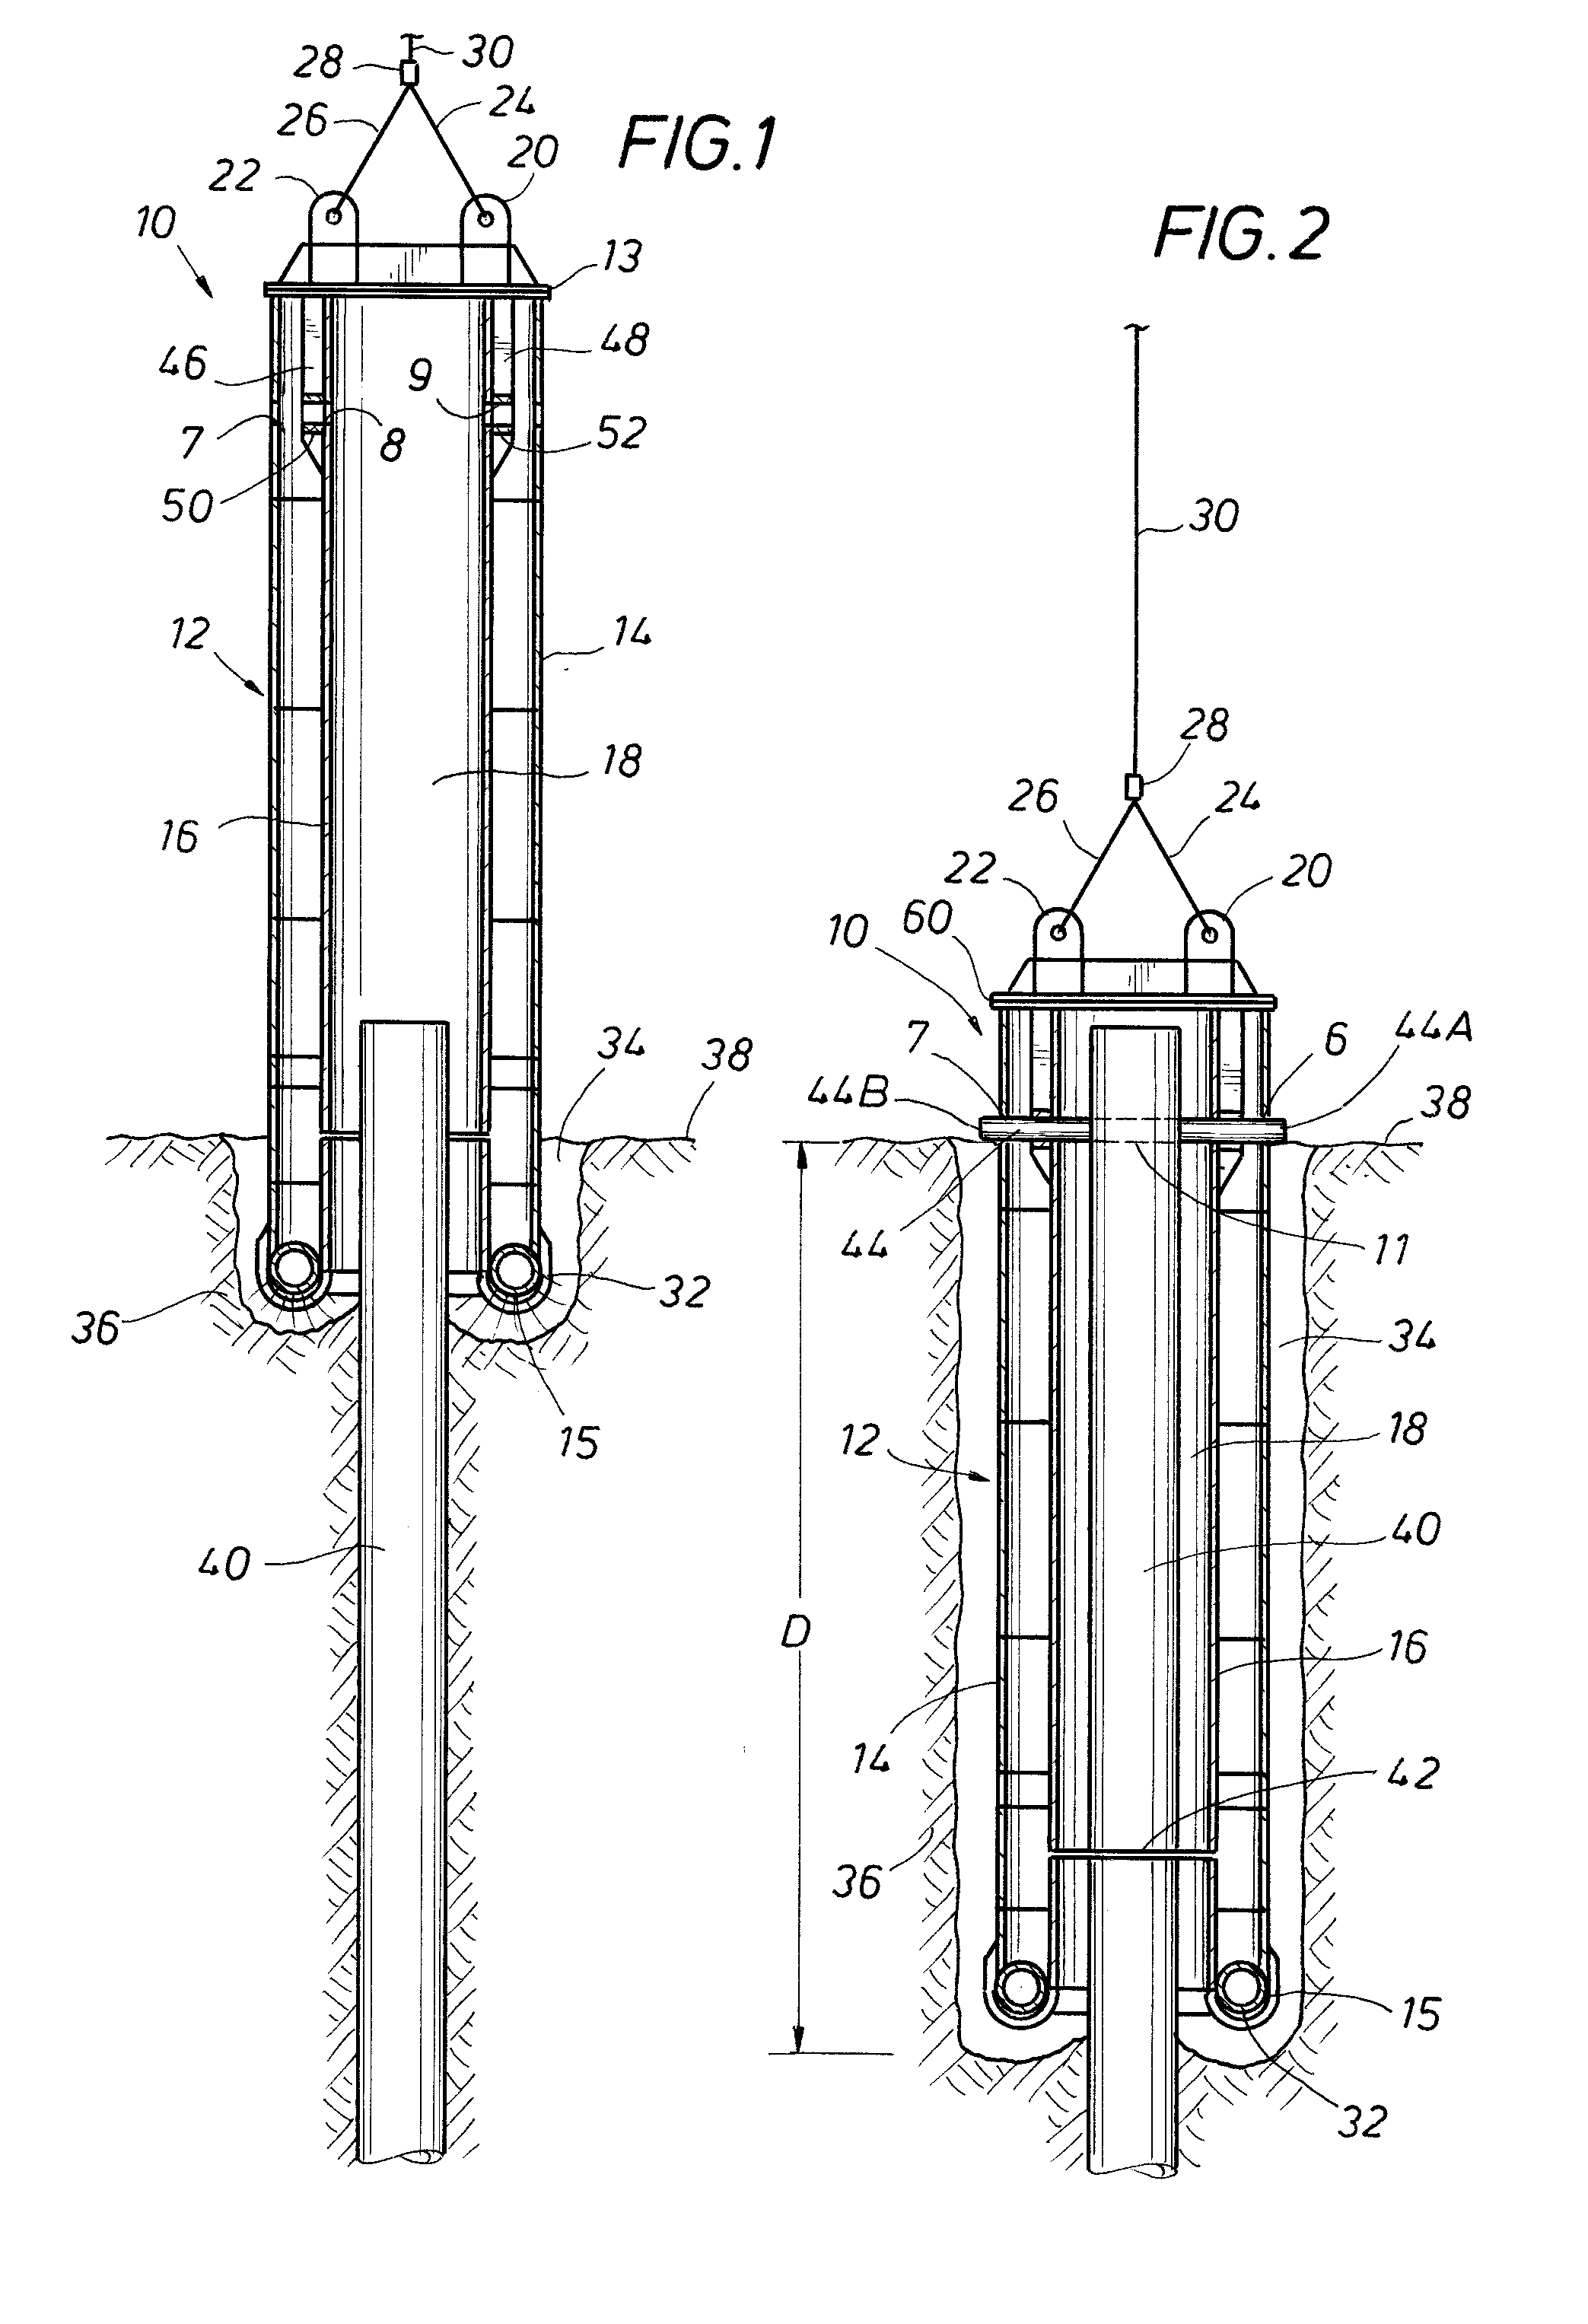 Apparatus and Method for Removing Subsea Structures